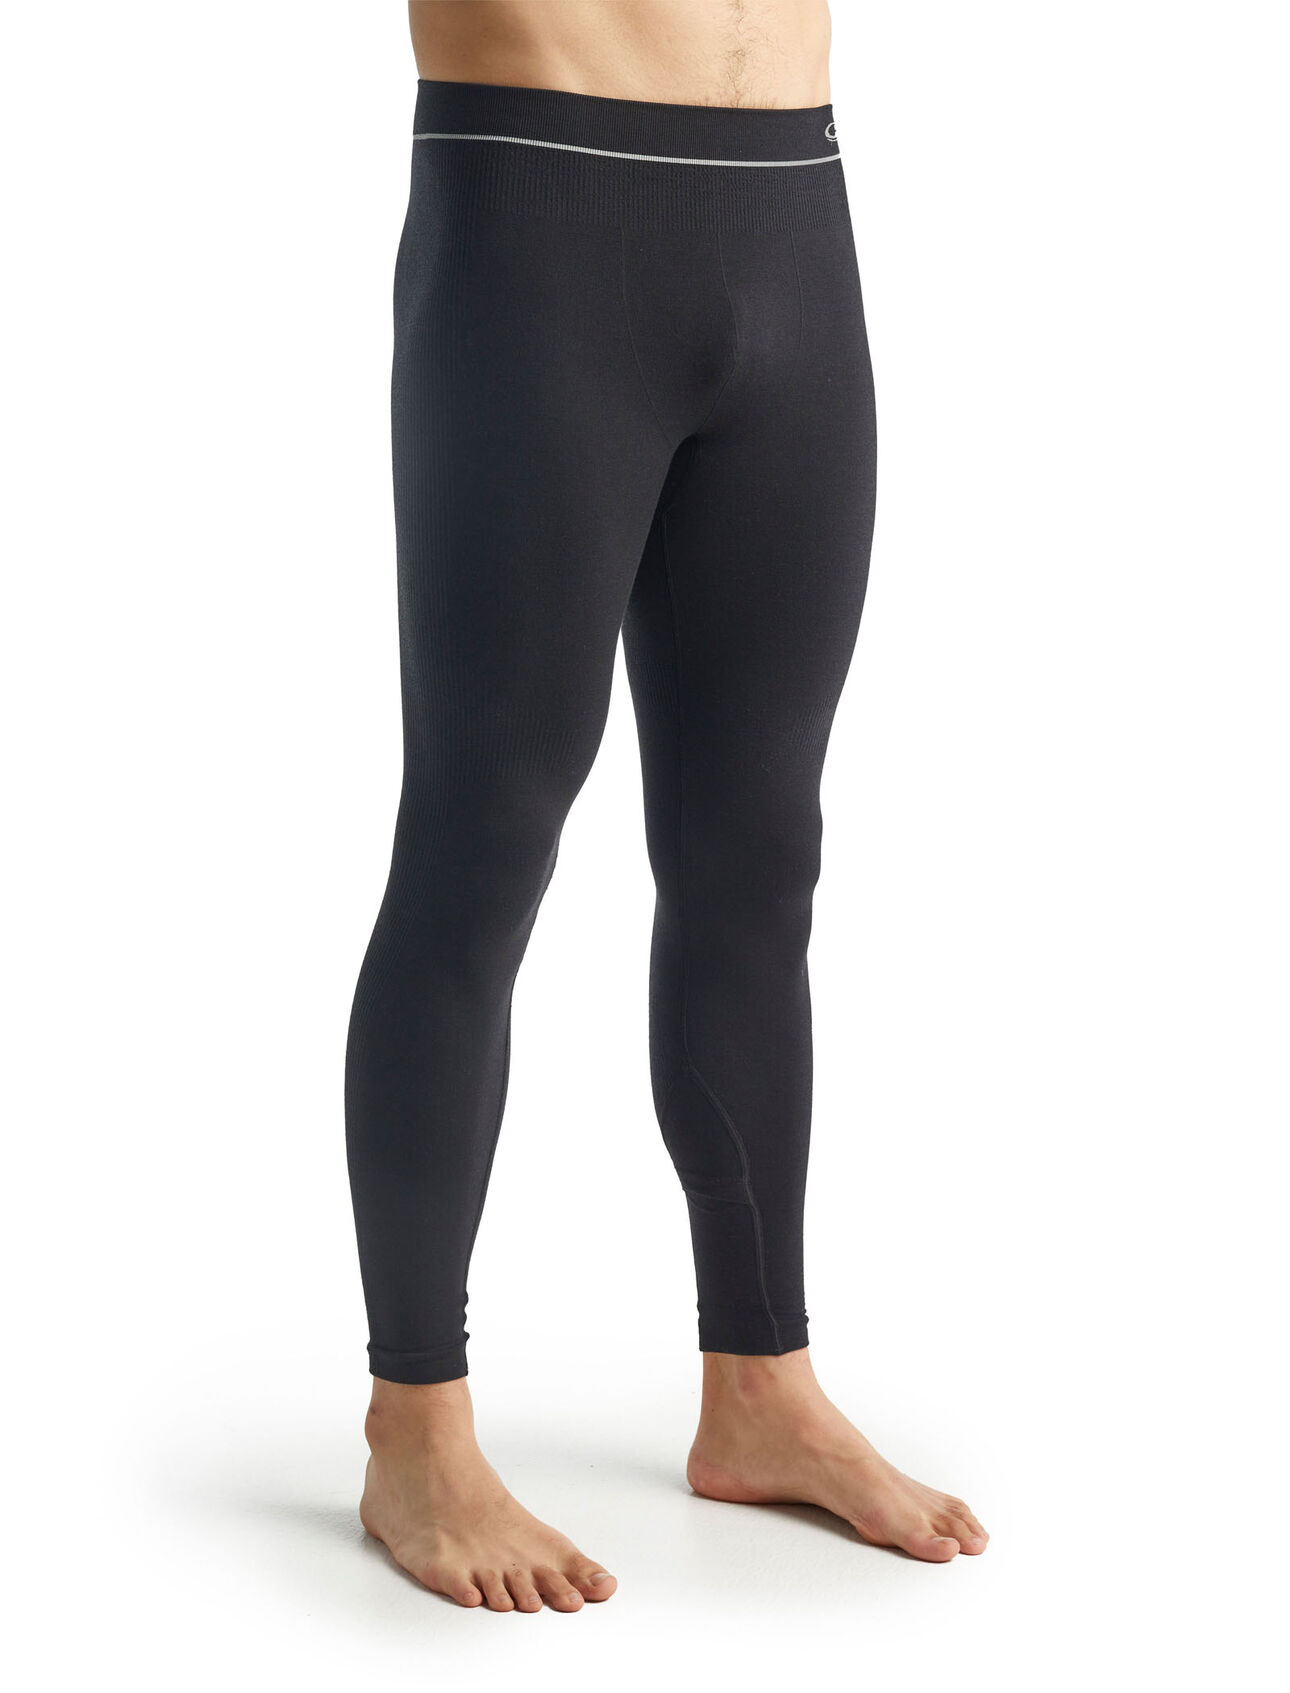 Cool-Lite™ Motion Seamless tights